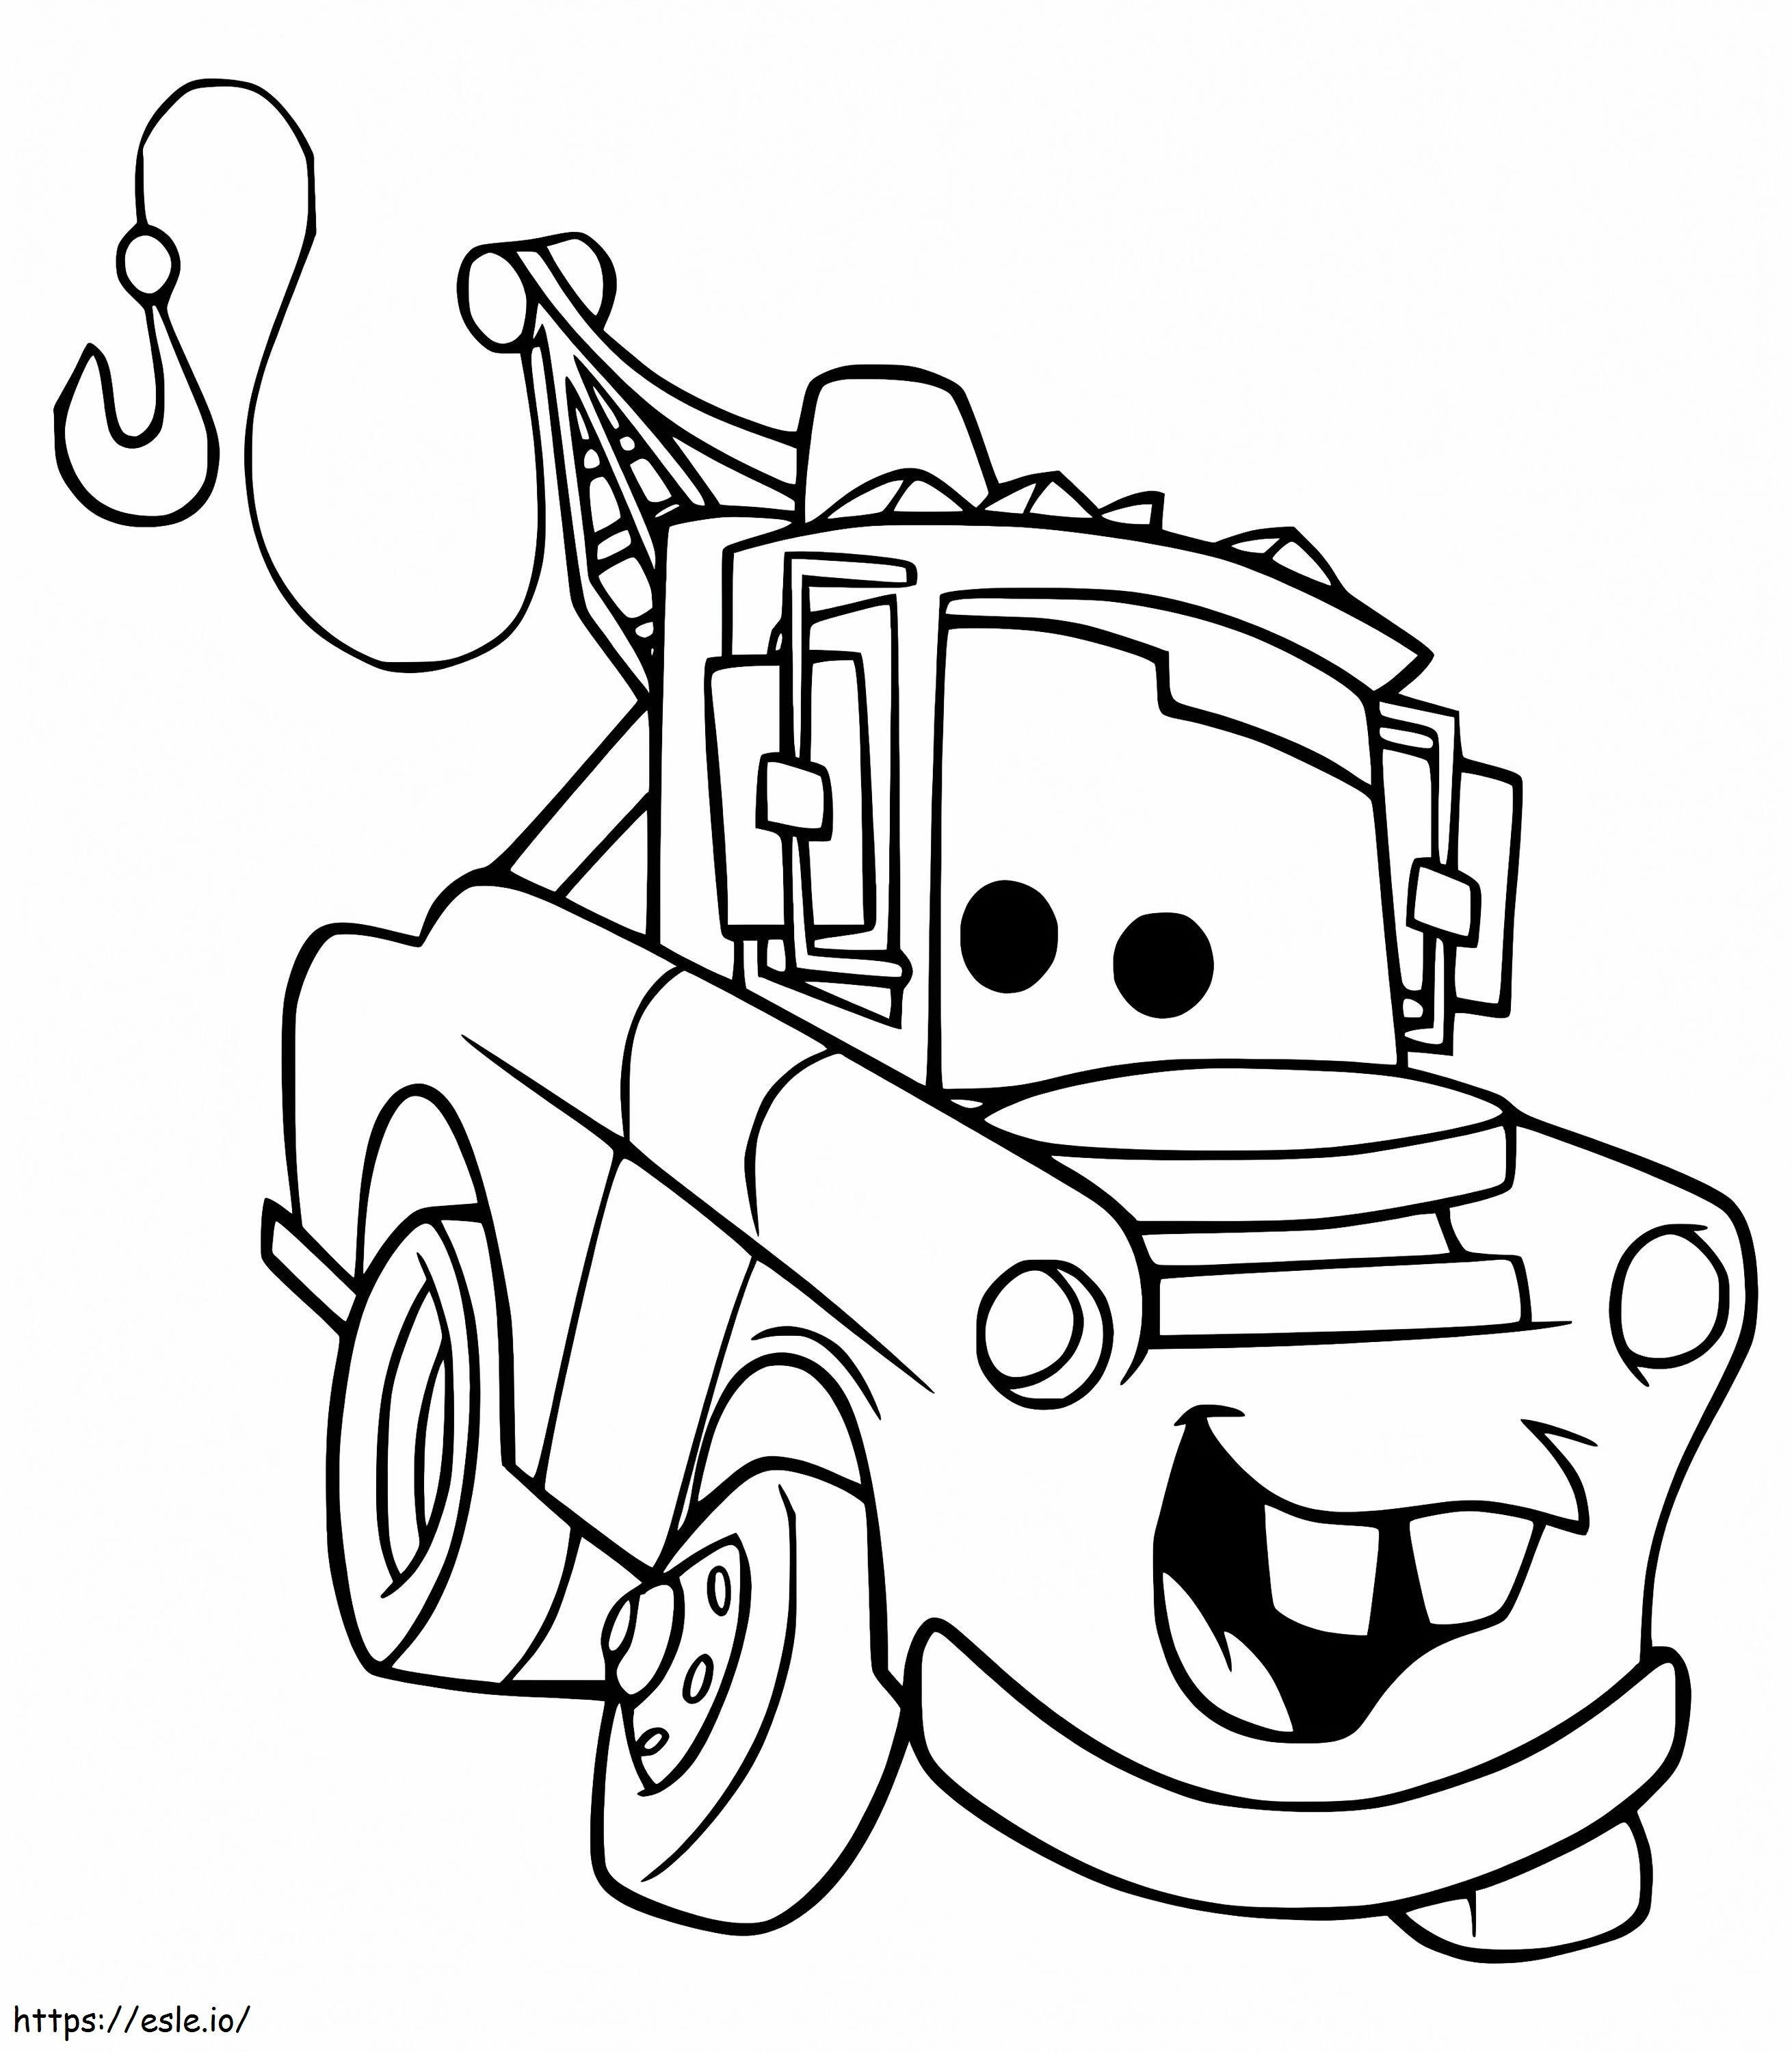 Happy Mater coloring page